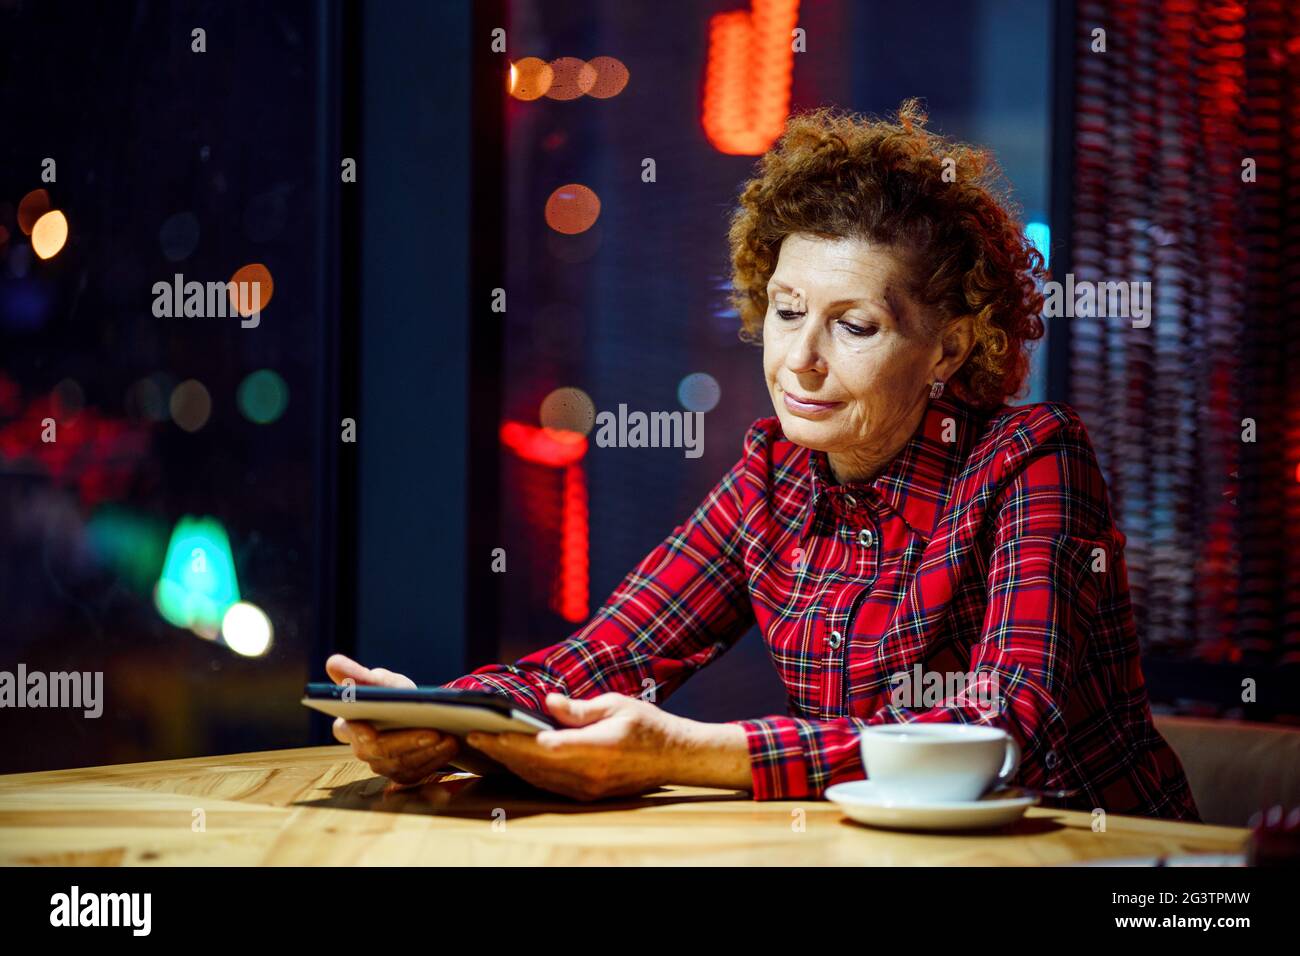 Mature woman with blond curly hair checks mail and social media notifications via tablet, smiling female holding tablet, watchin Stock Photo